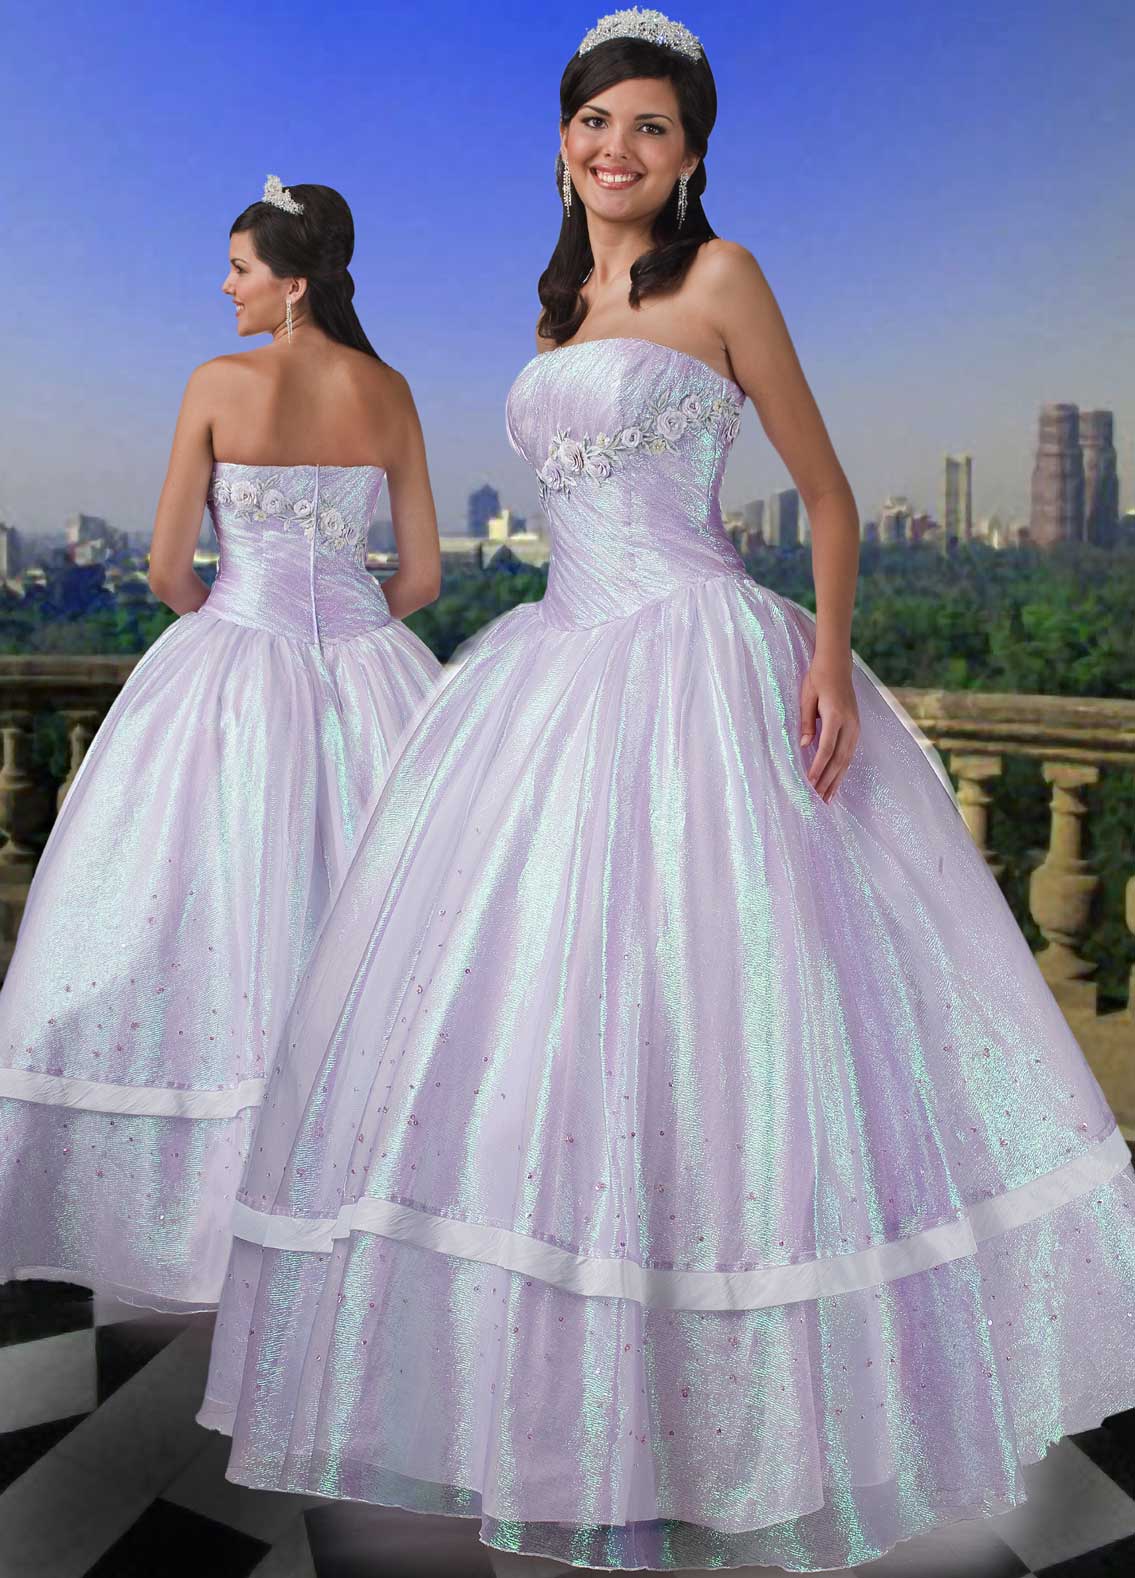 White Ball Gown Strapless Zipper Full Length Sequined Quinceanera Dresses With Flowers